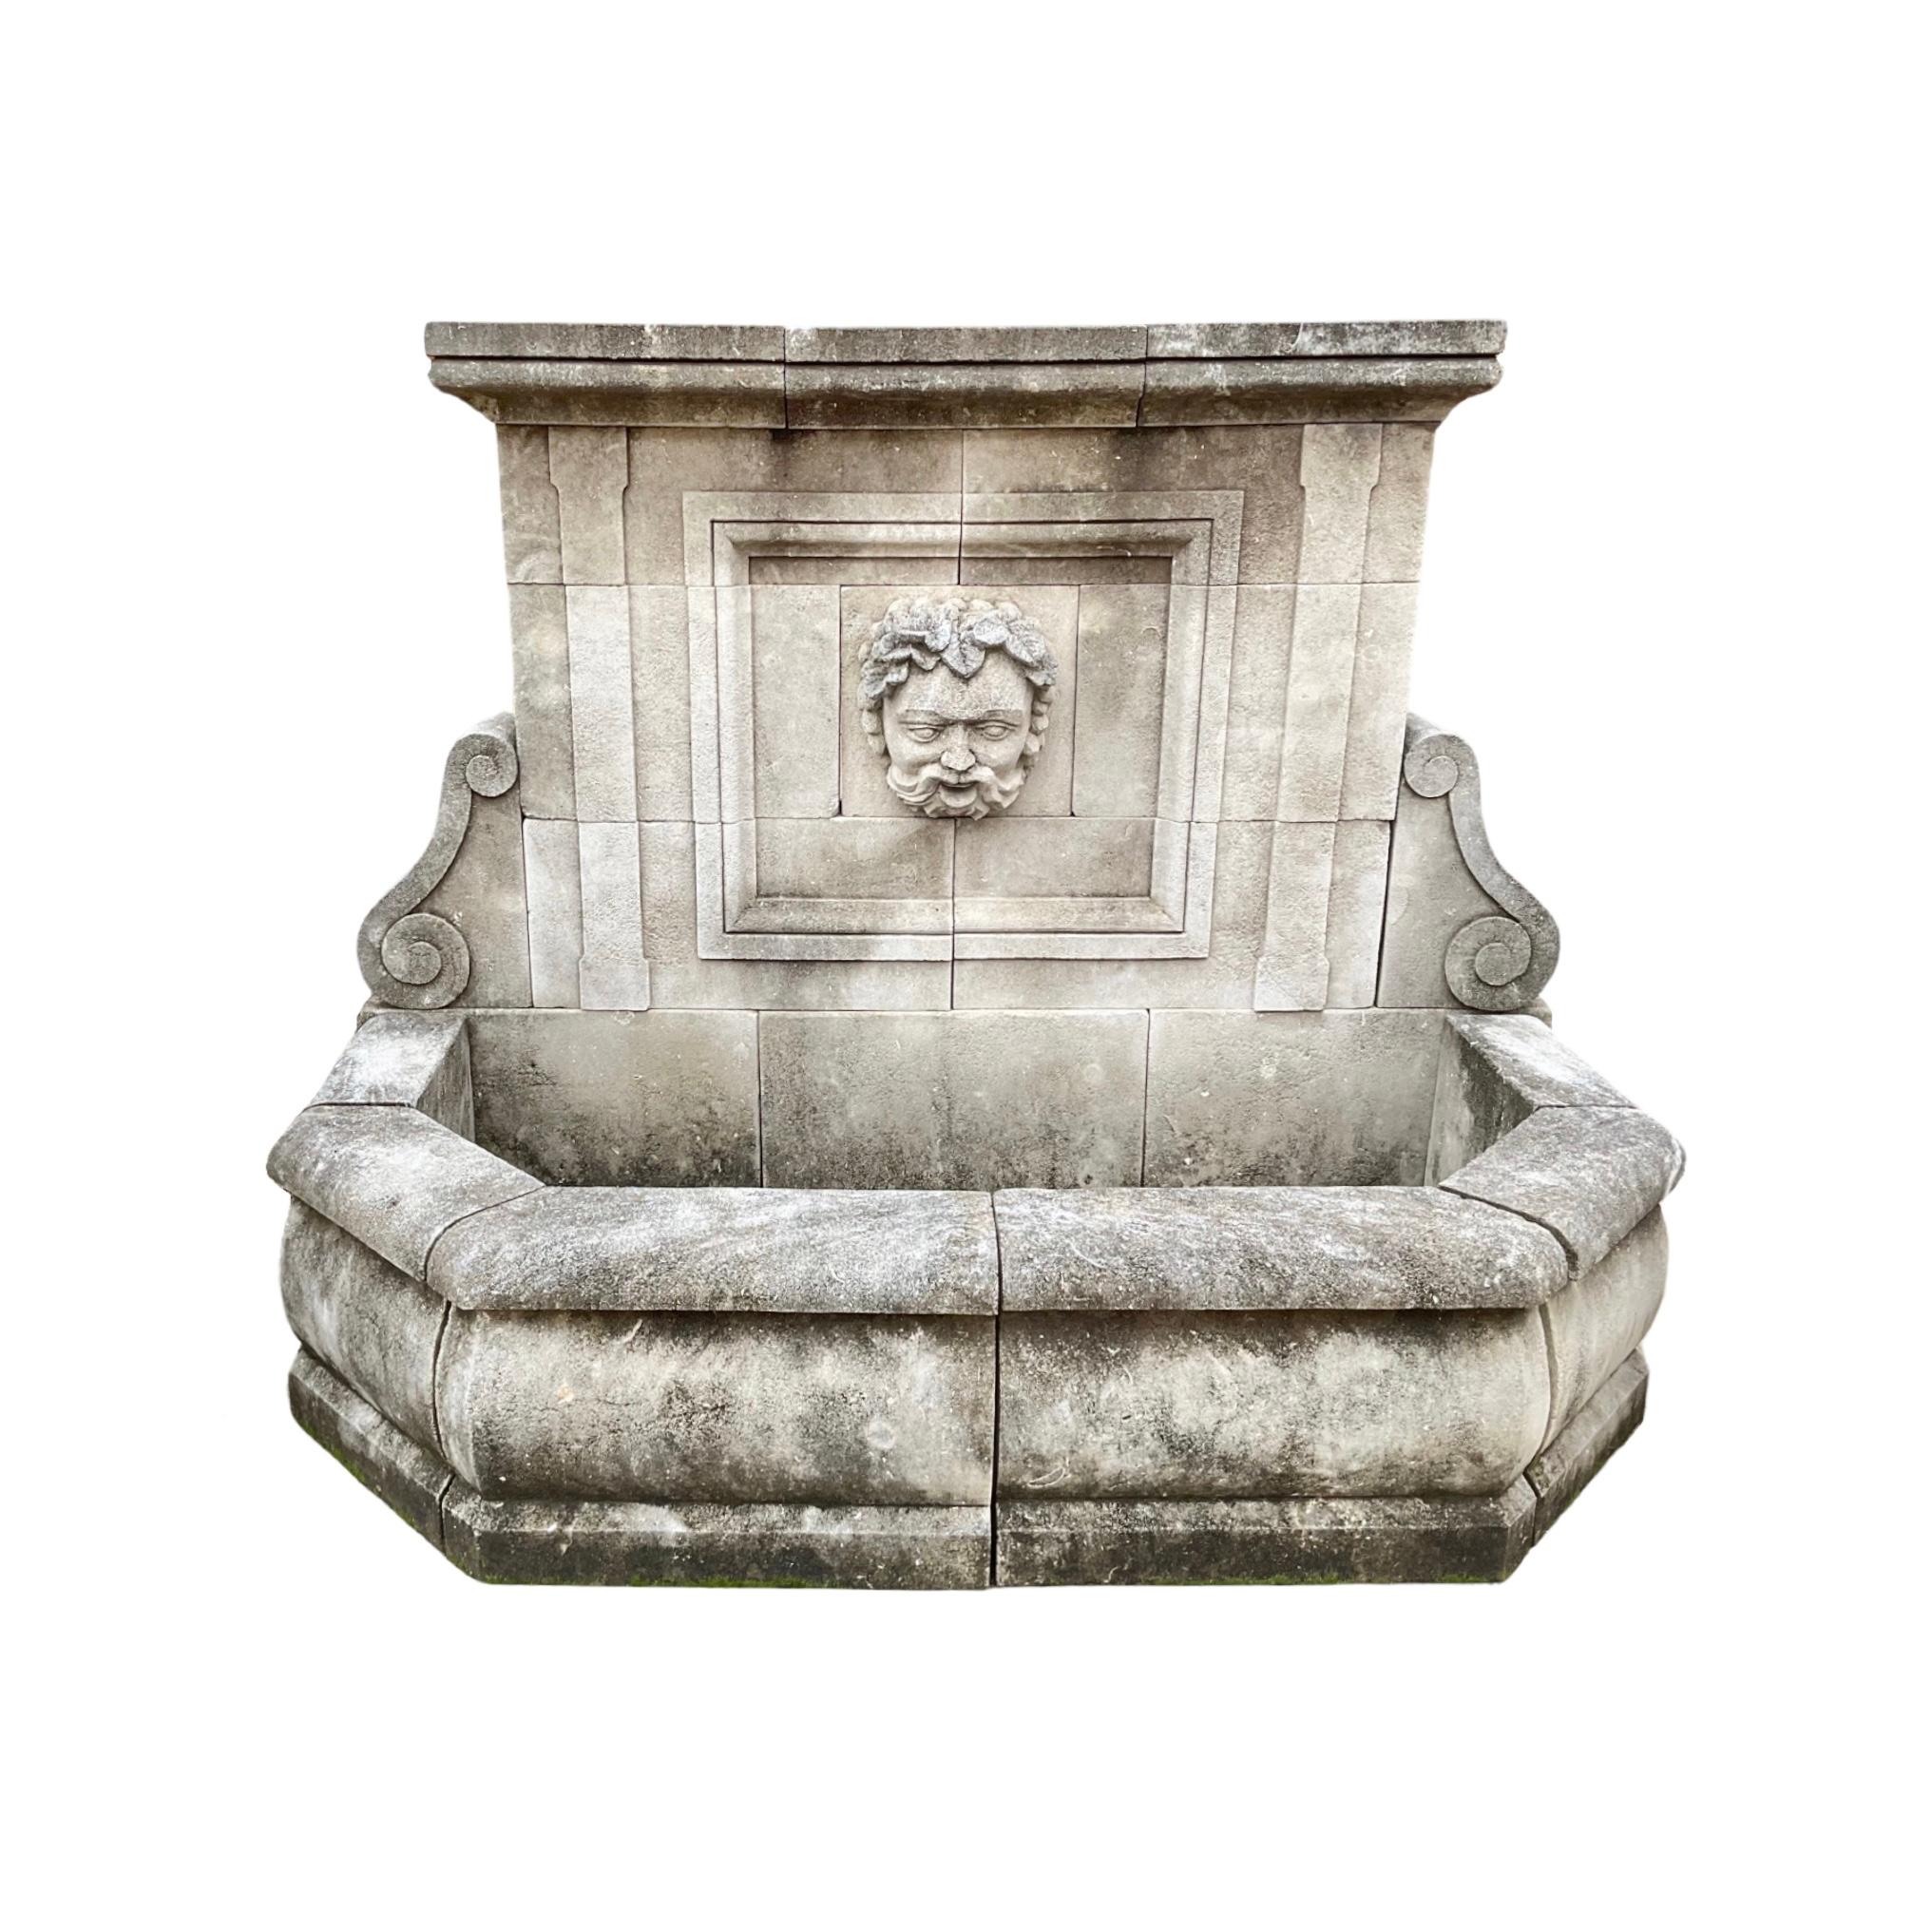 Add a touch of the Mediterranean to your project with our French Limestone Wall Fountain. Hand-carved with Classic French designs, including the Roman God of wine, Bacchus, this fountain is sure to impress. The curved basin wall, crown atop the